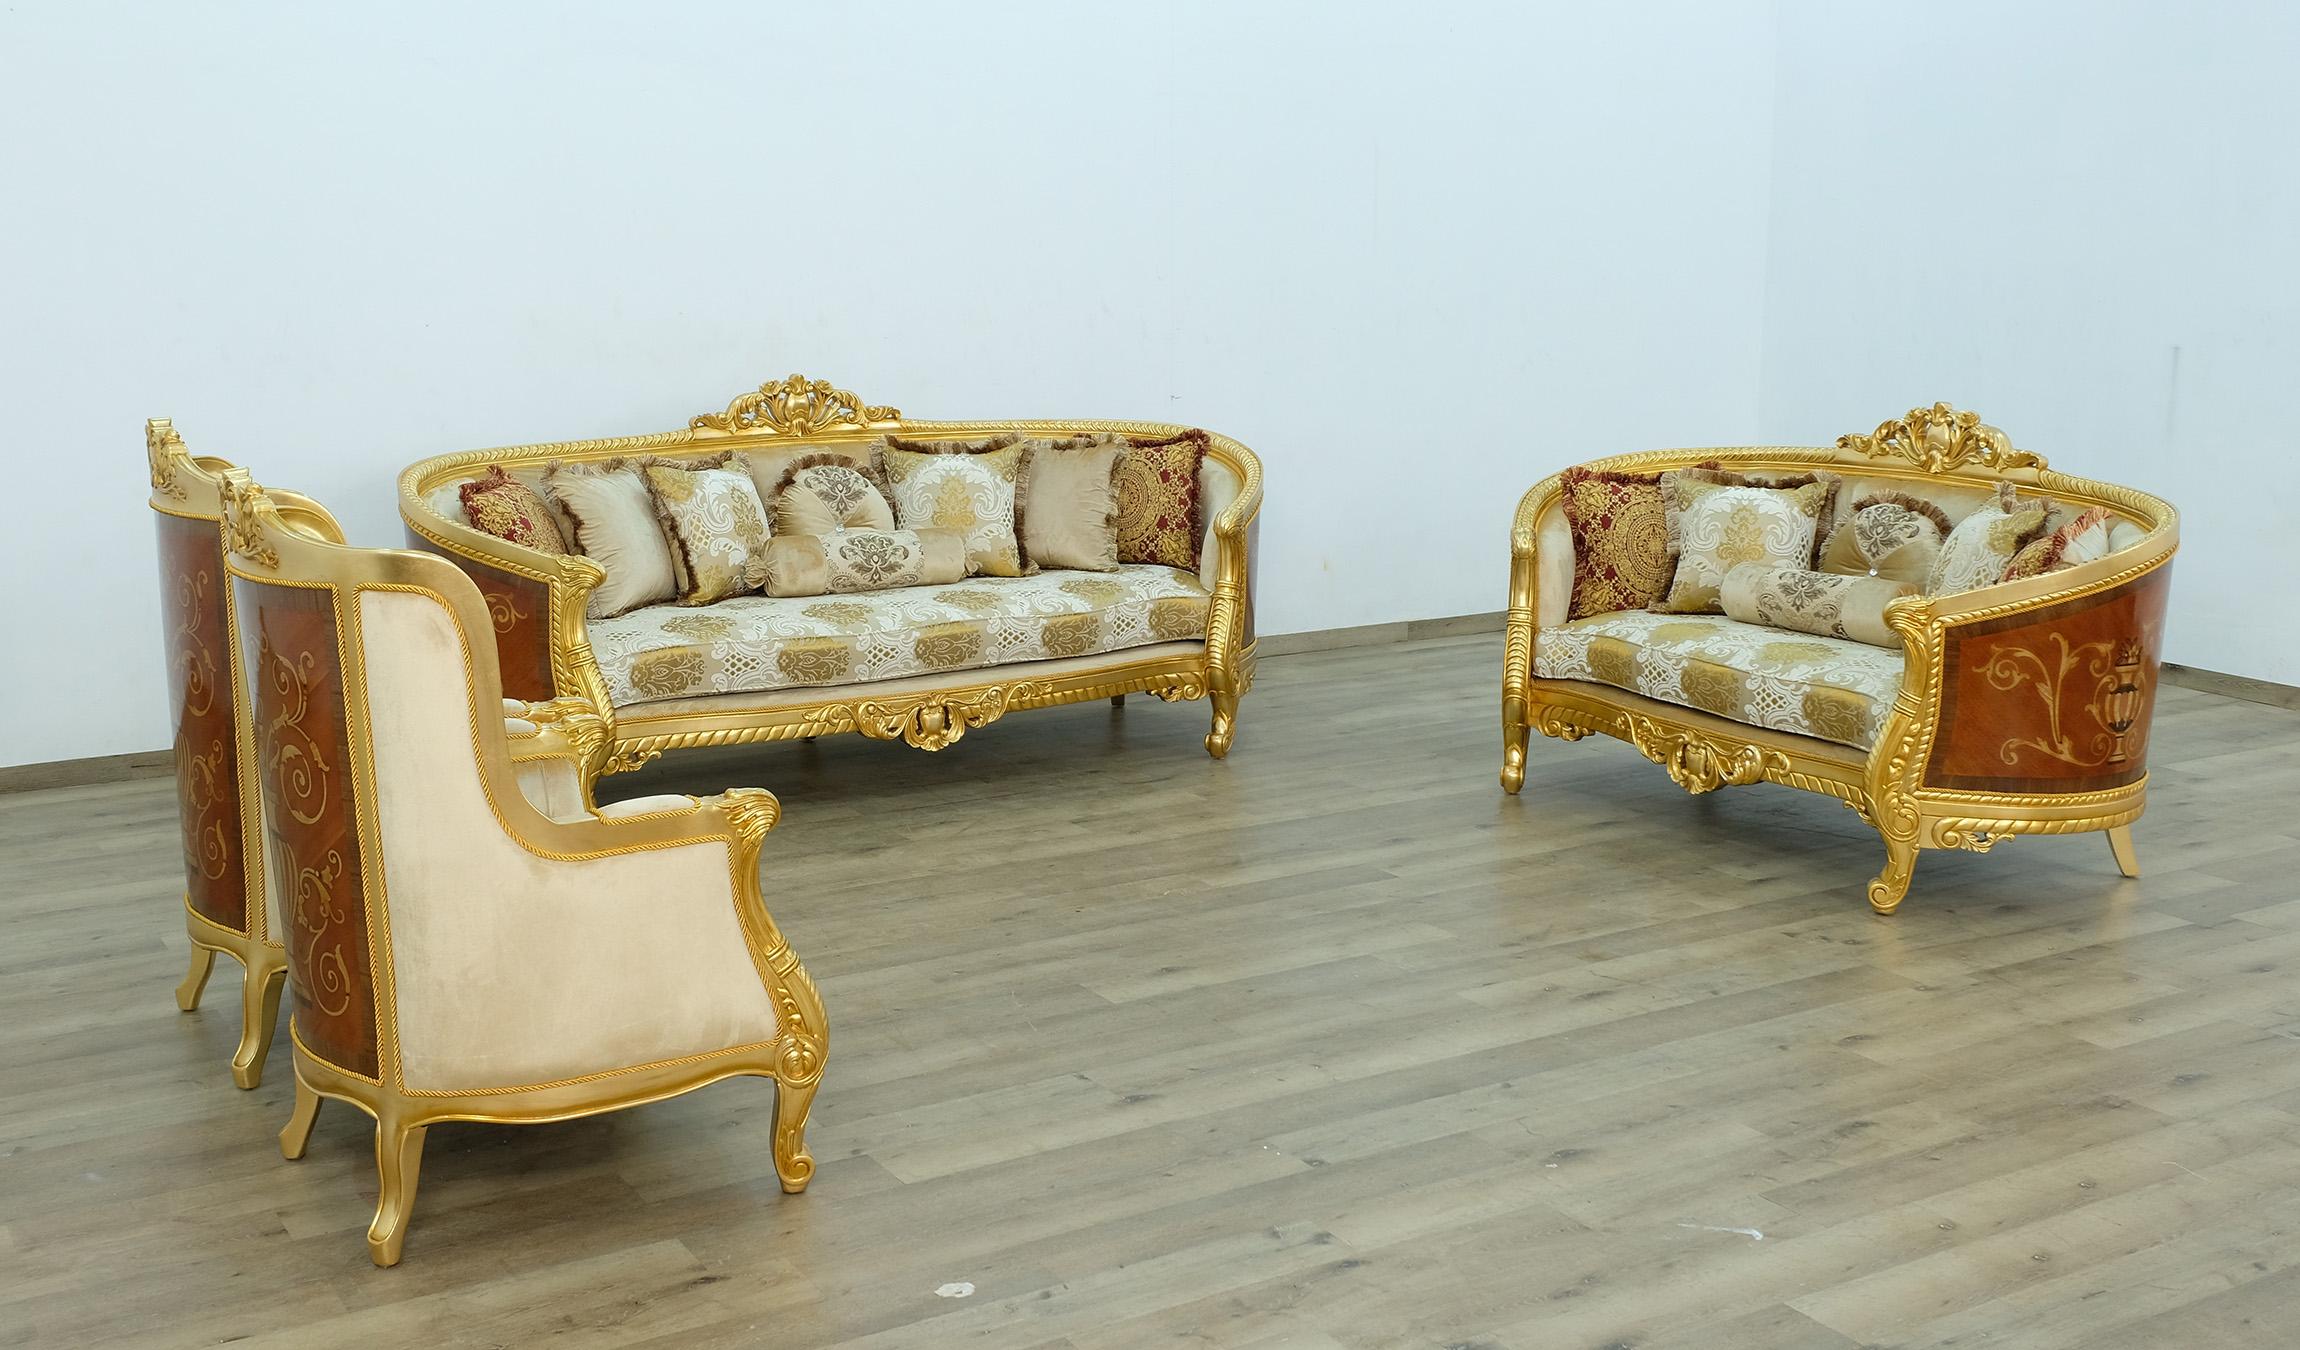 

    
Imperial Luxury Gold Fabric LUXOR Sofa Set 4Ps EUROPEAN FURNITURE Solid Wood
